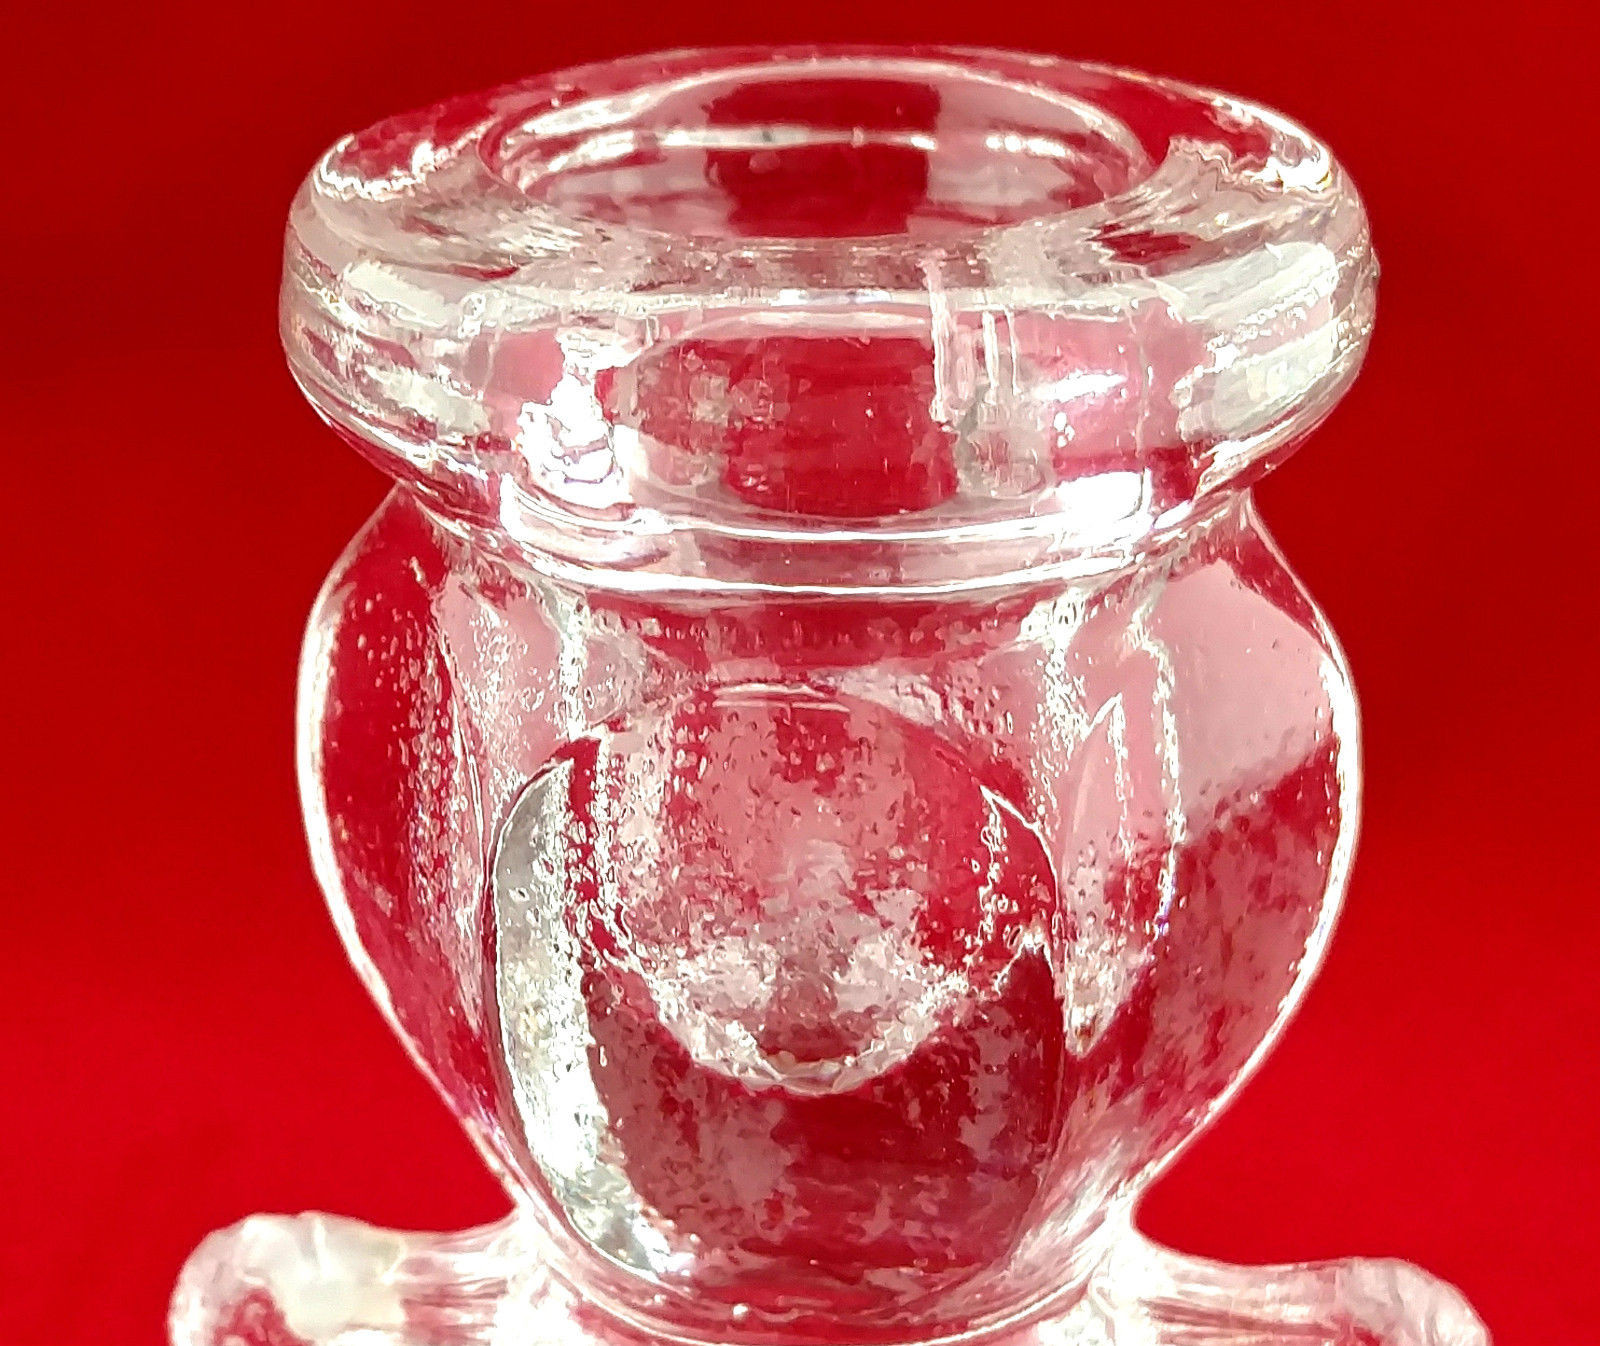 20 attractive Fenton Red Hobnail Vase 2024 free download fenton red hobnail vase of vintage fenton crystal clear dolphin candlestick holders 1927 1937 with regard to 6 of 8 vintage fenton crystal clear dolphin candlestick holders 1927 1937 set of 